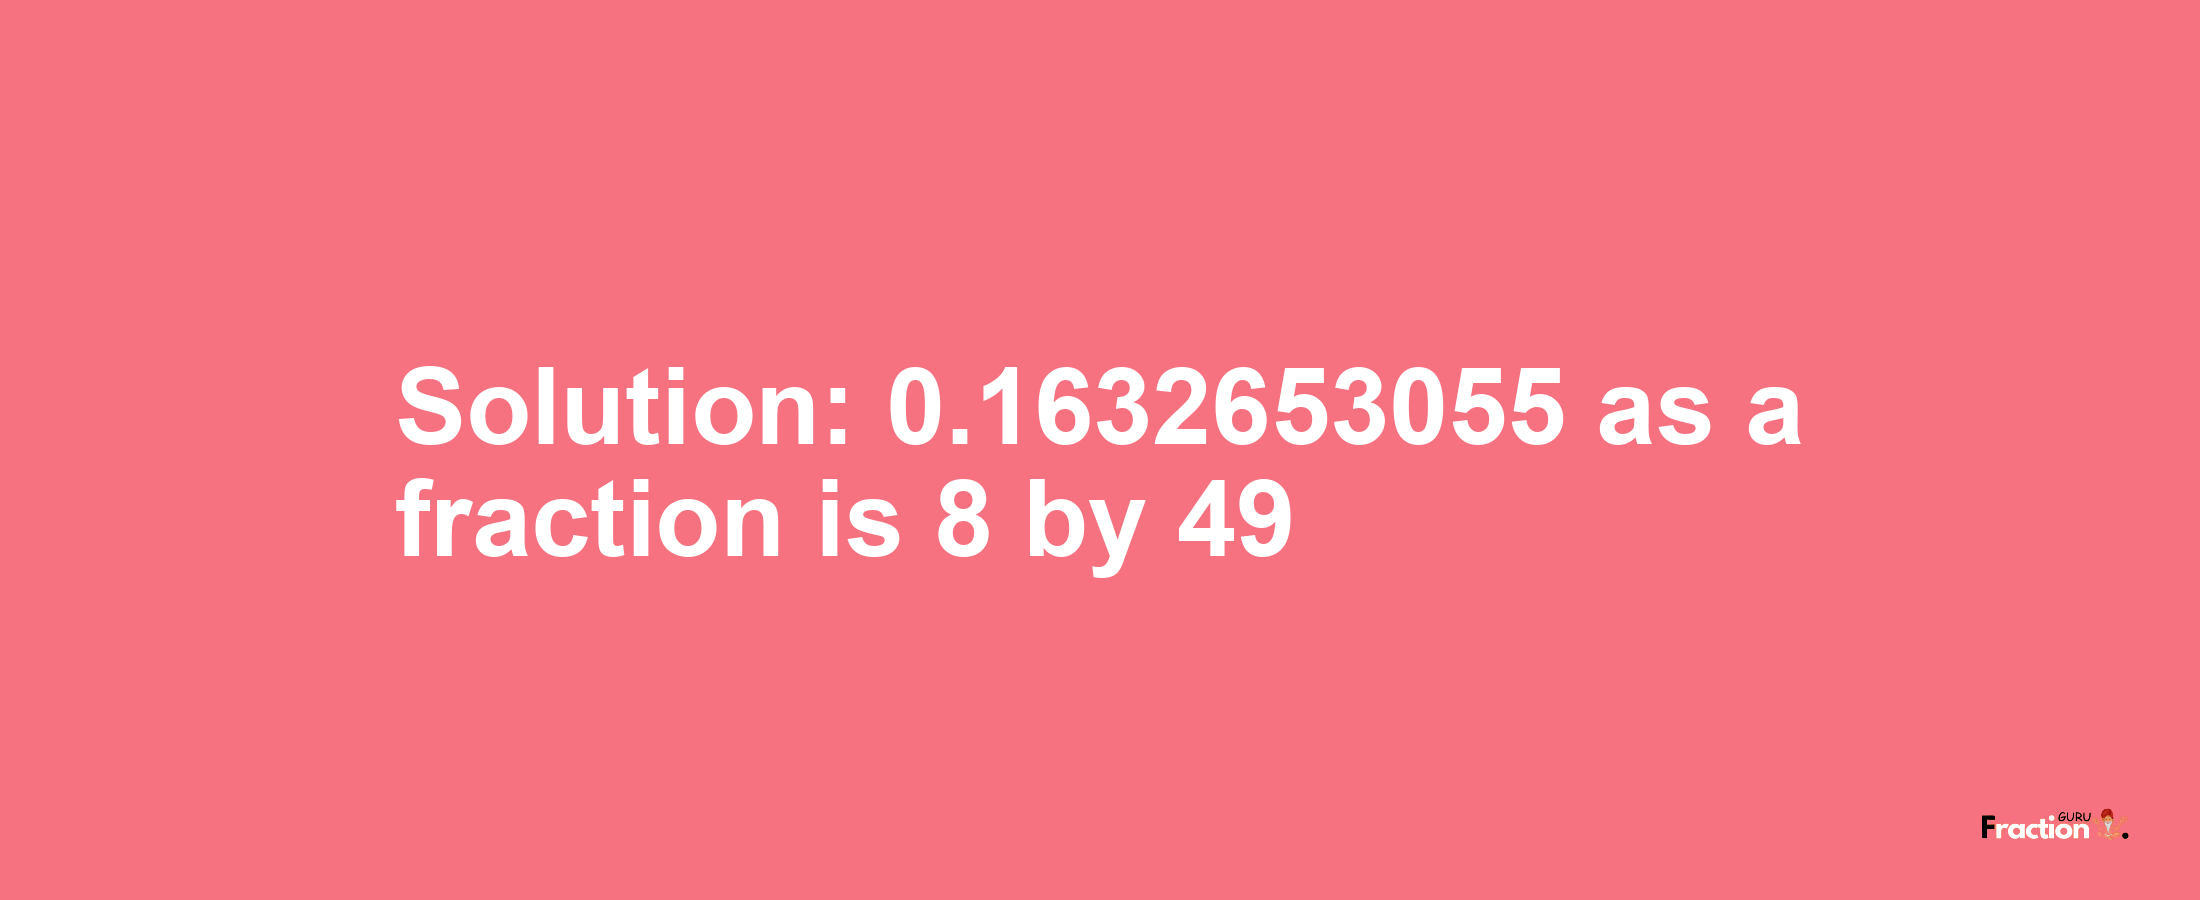 Solution:0.1632653055 as a fraction is 8/49